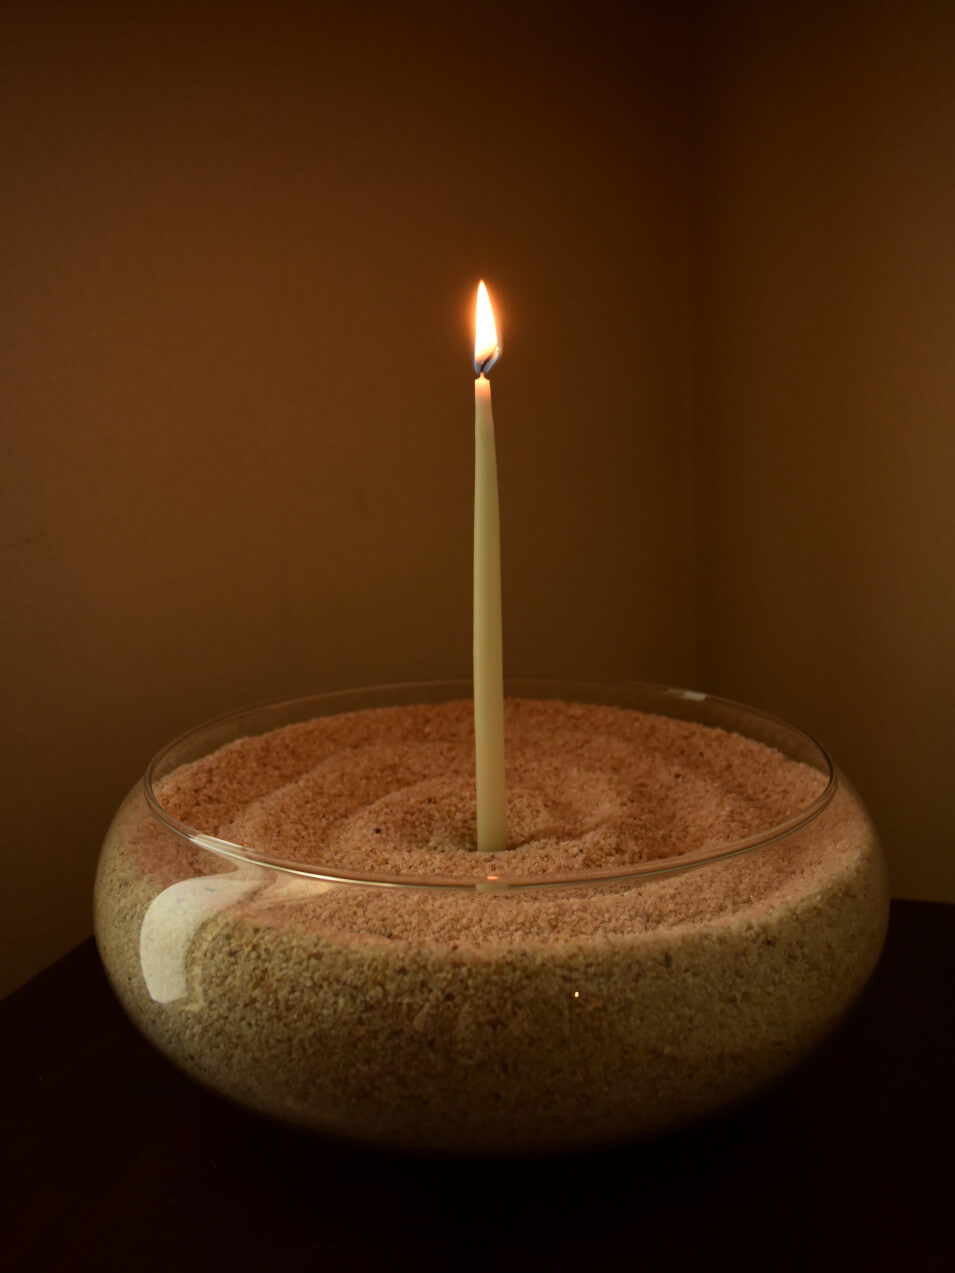 Glowing candle in a bowl of sand.